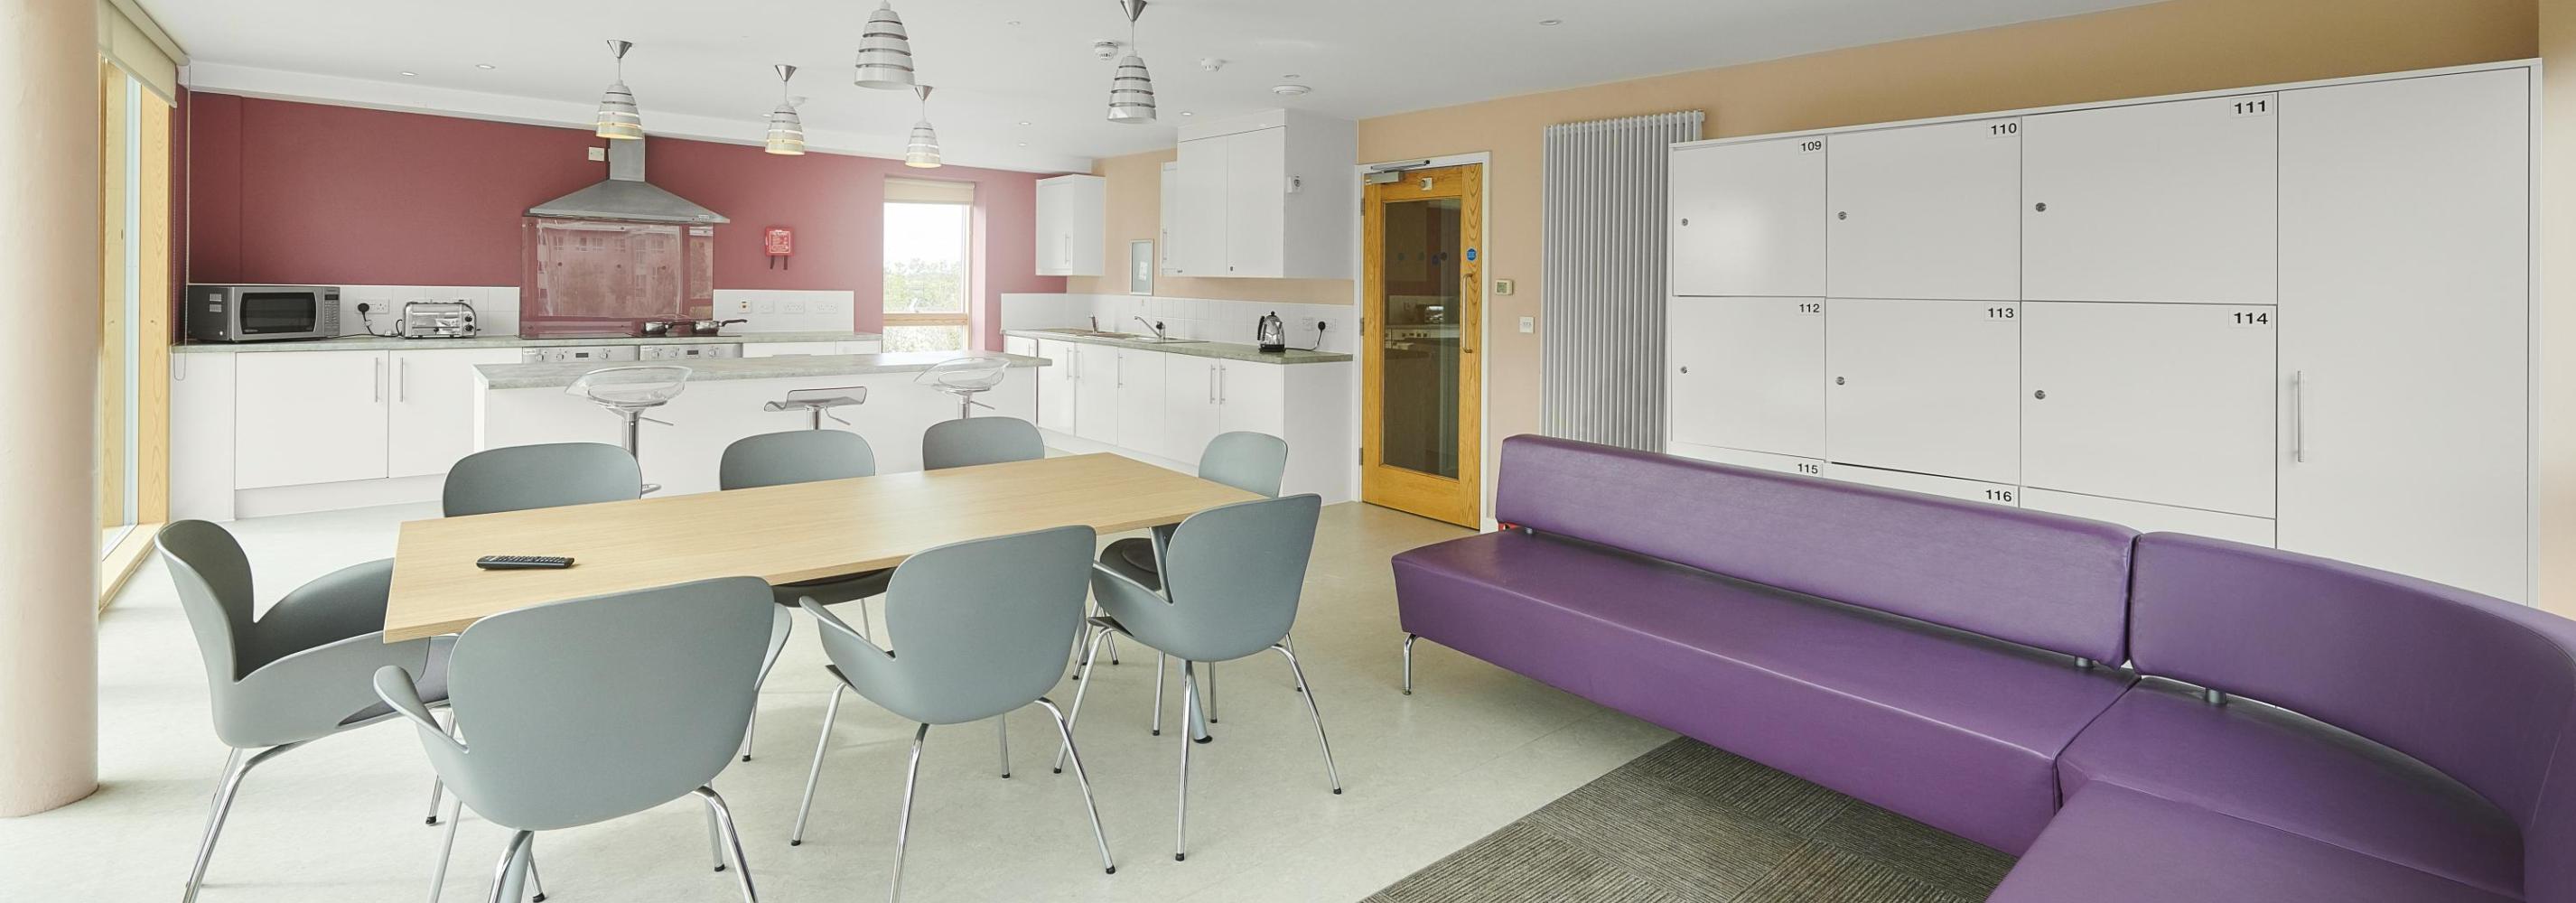 Interior of shared kitchen and dining facilities showing dining table and chairs, sofa seating area and food preparation area. 